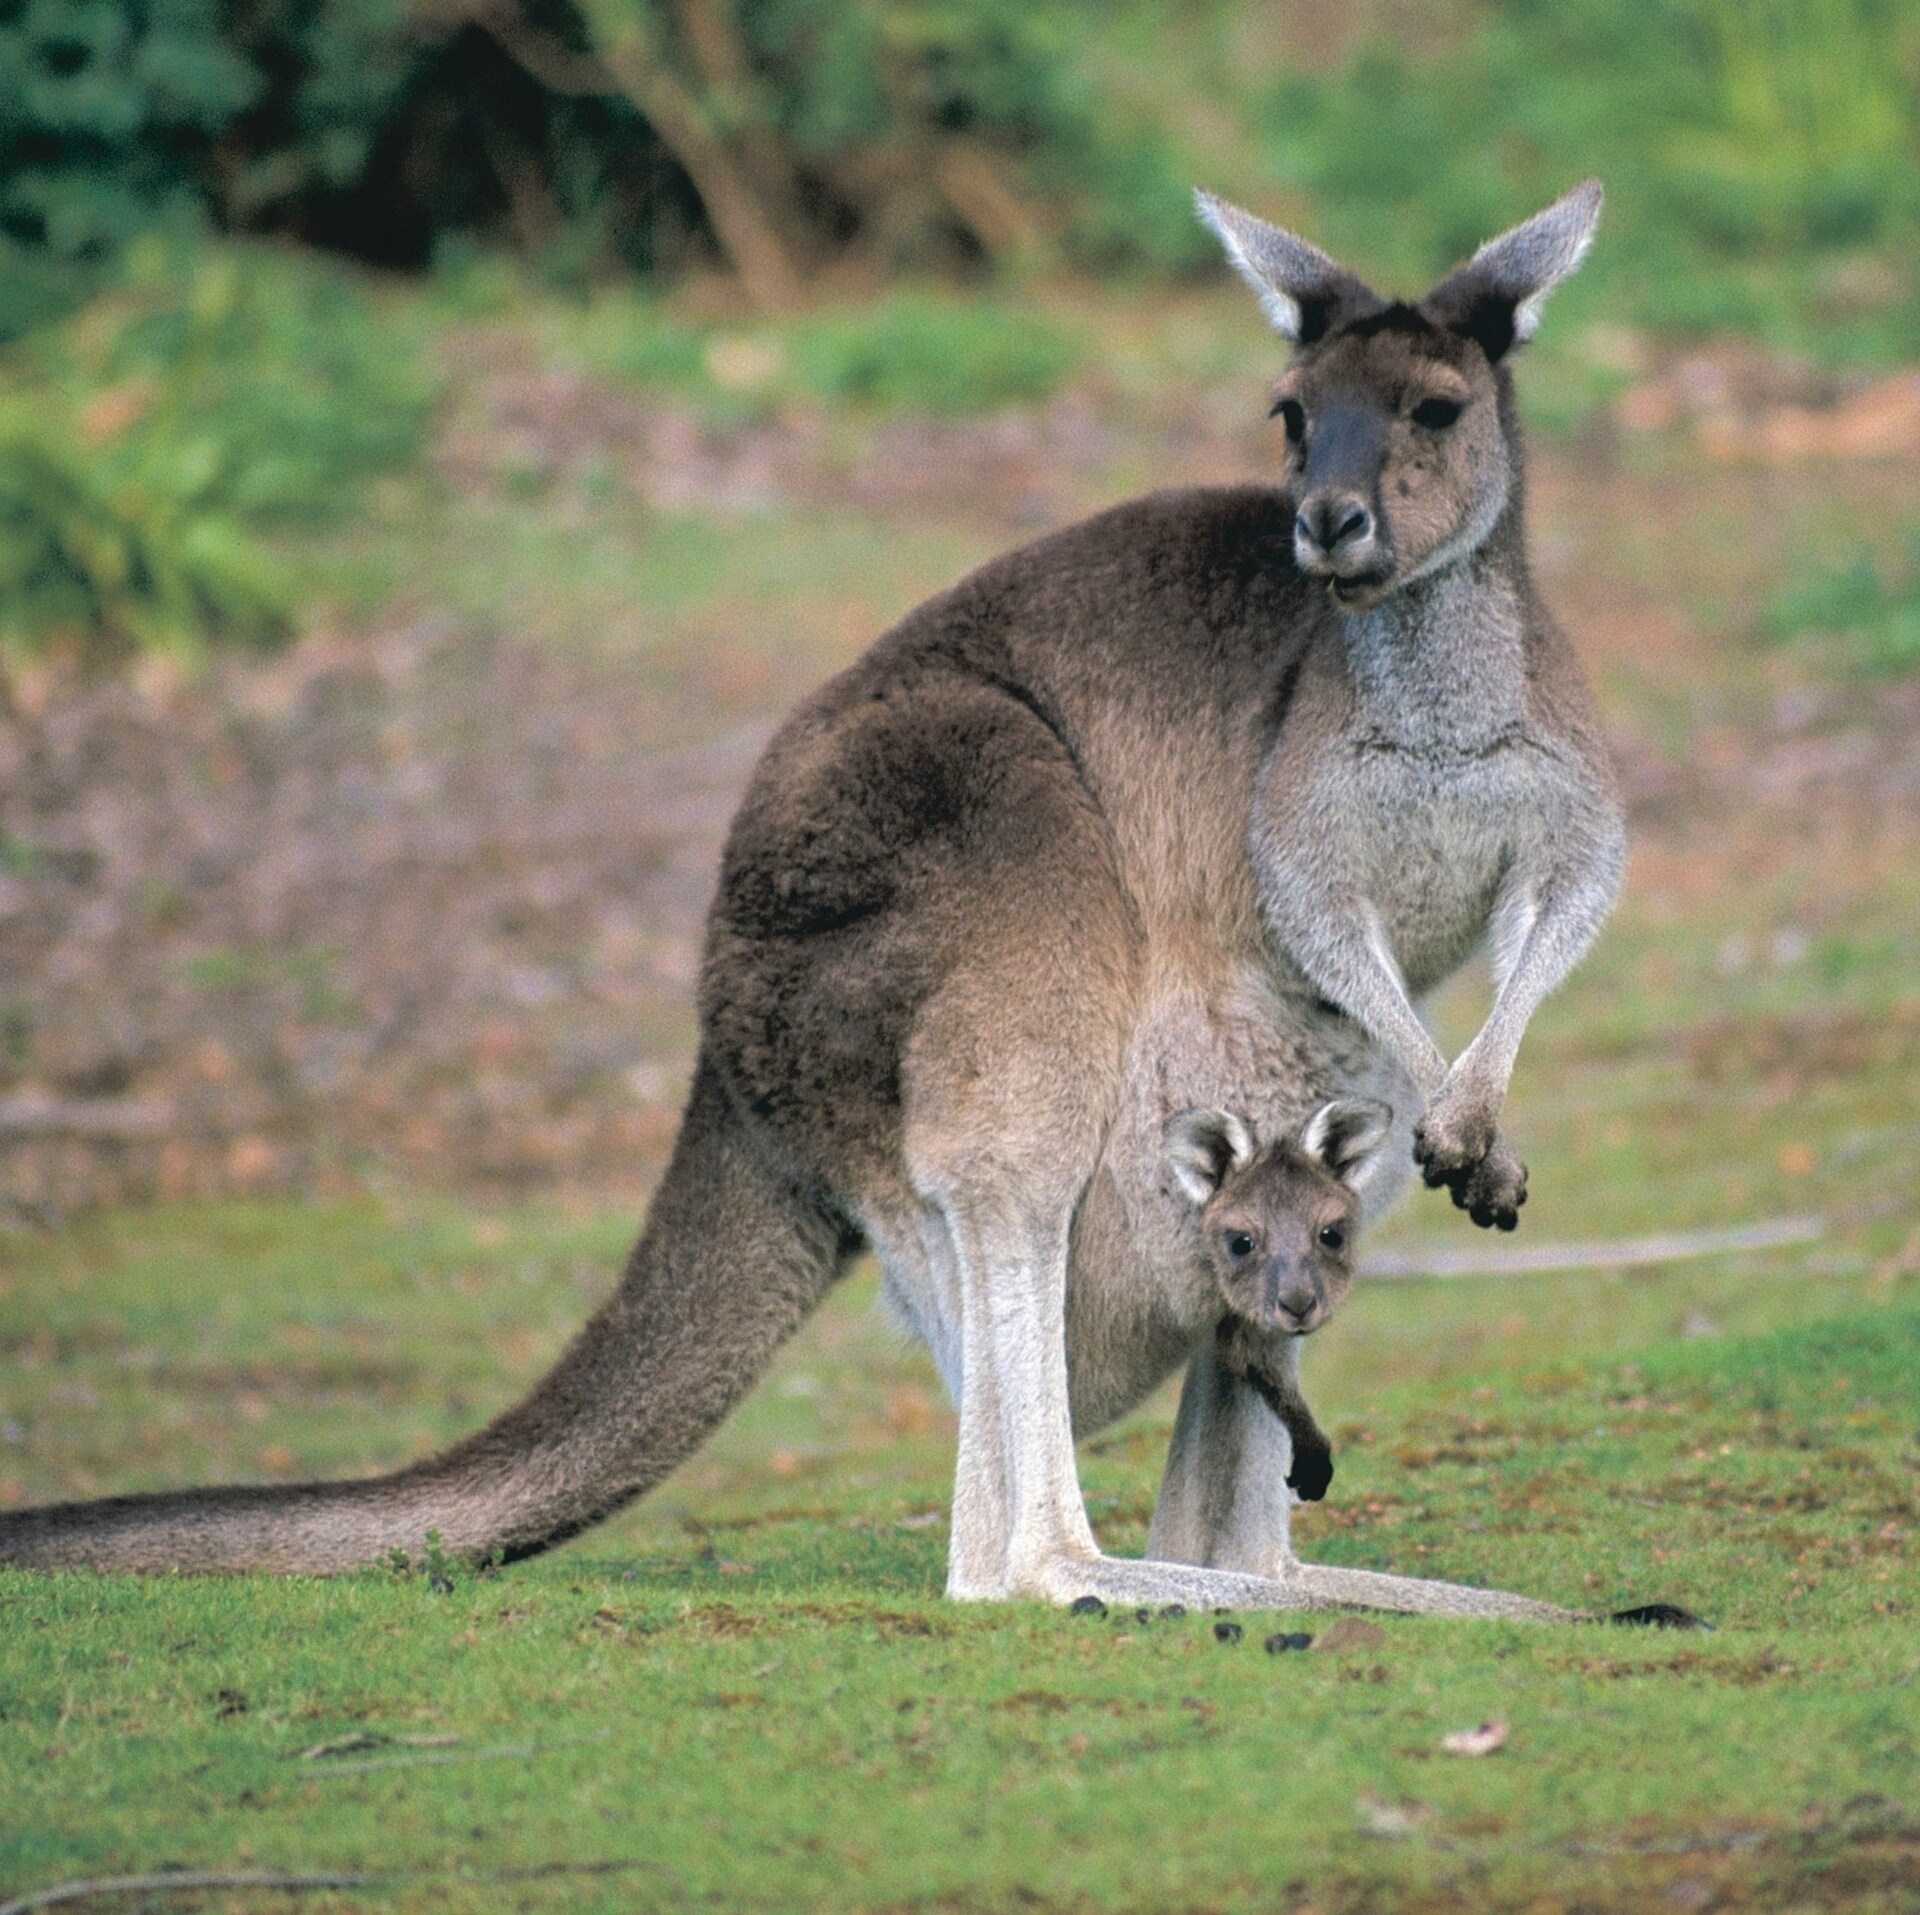 A kangaroo with a joey in its pouch at Donnelly River © Tourism WA